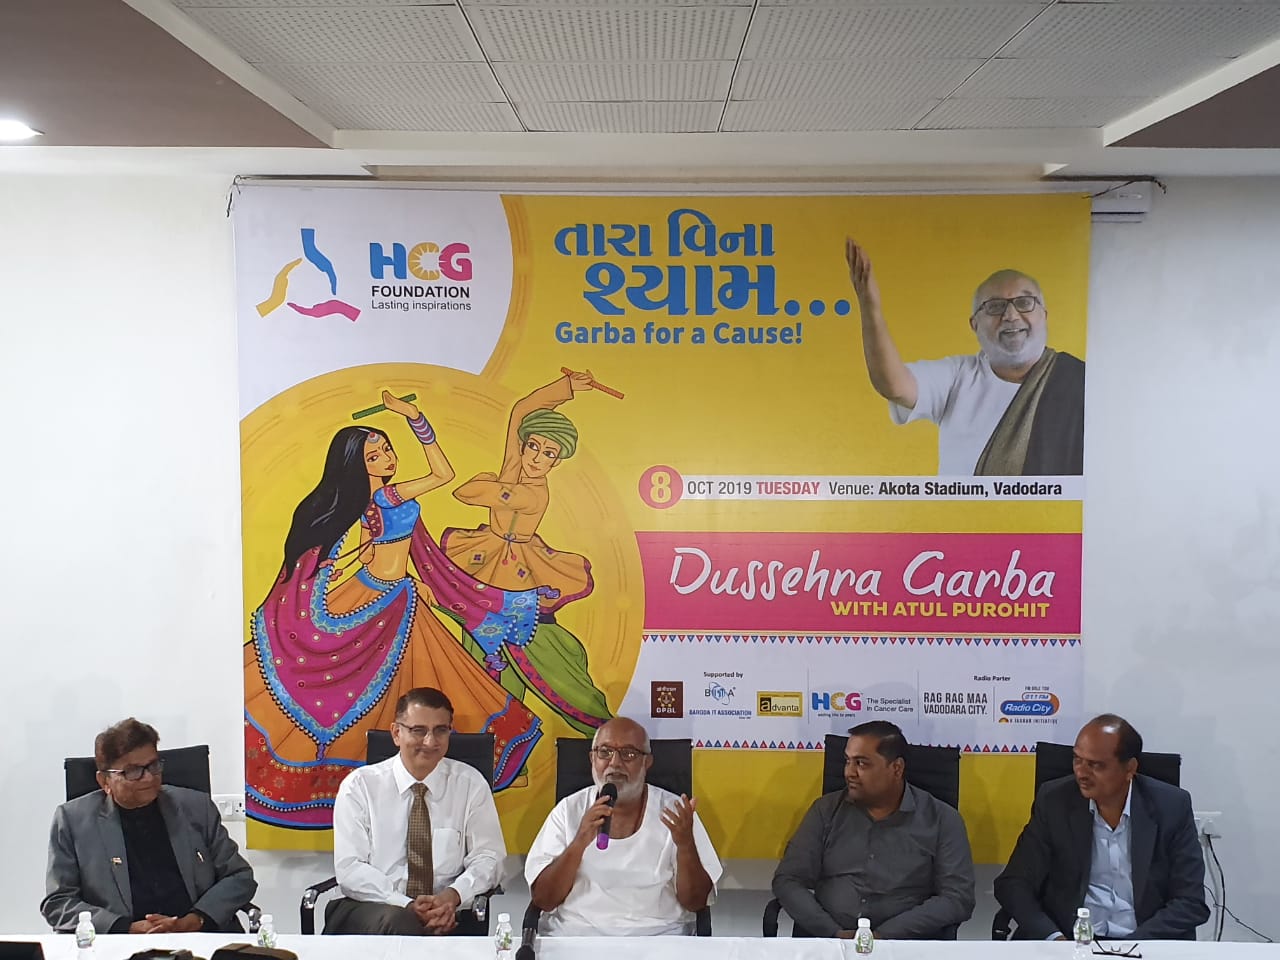 HCG “Charity Garba” A New Ray of Hope for Cancer Fighters